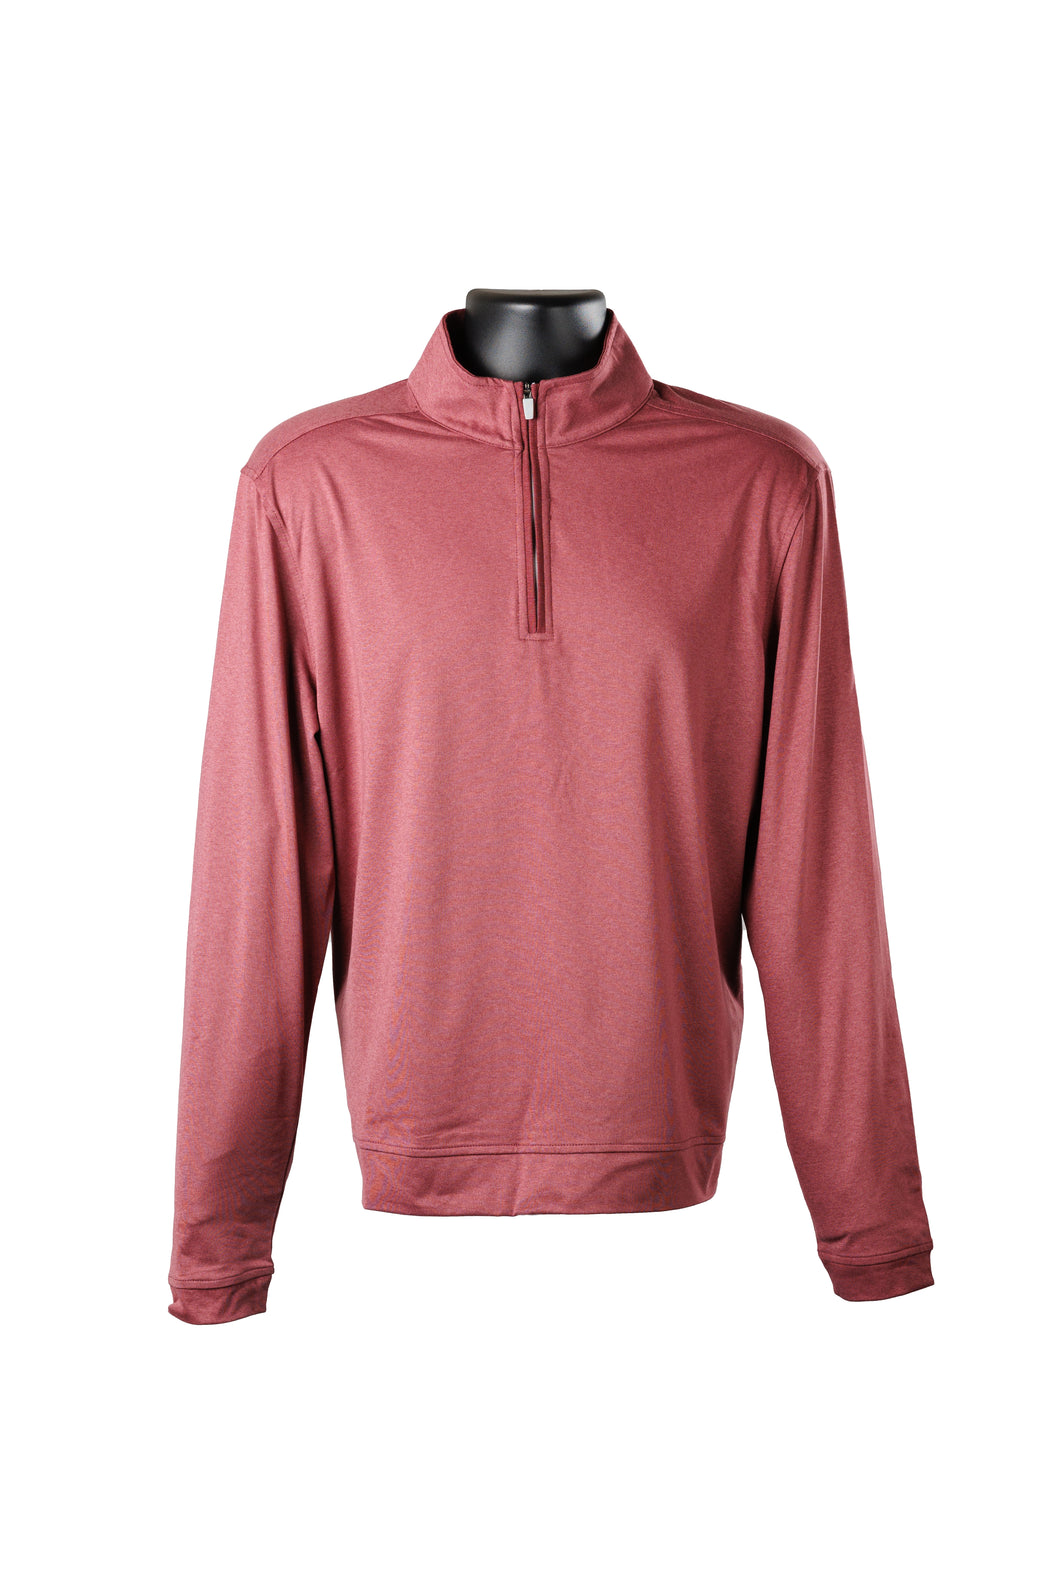 Southern Tide Performance 1/4 Zip